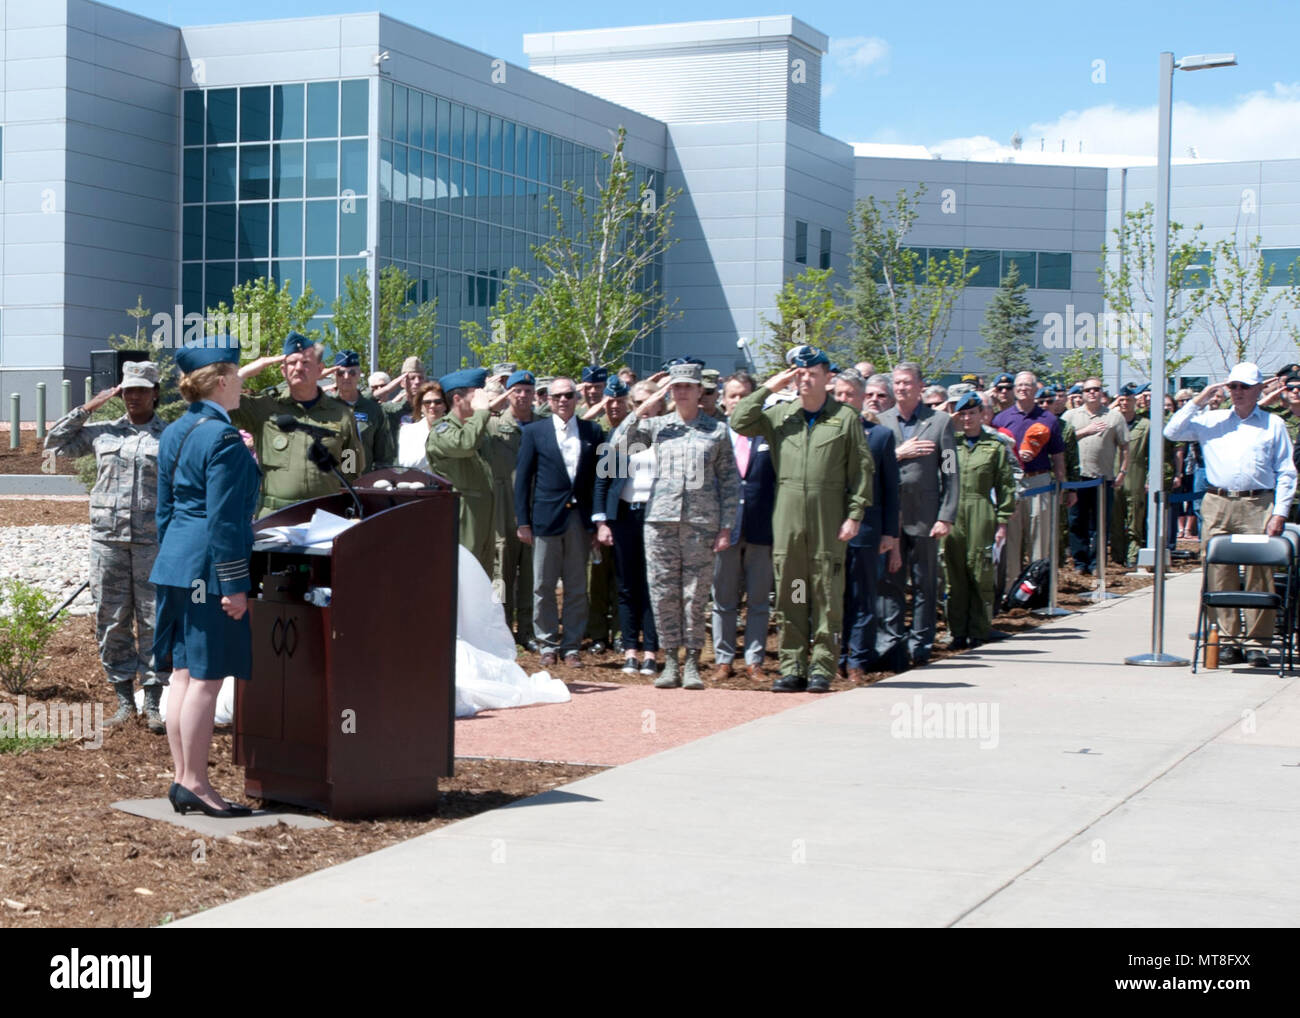 Royal Canadian Air Force Honorary Colonel Loreena McKennitt sings the Canadian and U.S. National Anthems during the unveiling ceremony for a memorial cairn outside the NORAD and USNORTHCOM headquarters building on Peterson Air Force Base, Colorado, May 11. The cairn honors the Canadian service men and women who passed away while serving at NORAD in Colorado Springs. The placement and dedication of the cairn was conducted in conjunction with the 60th Anniversary of NORAD and the U.S. Canadian binational NORAD agreement. (DoD Photo By: Jhomil Bansil) Stock Photo